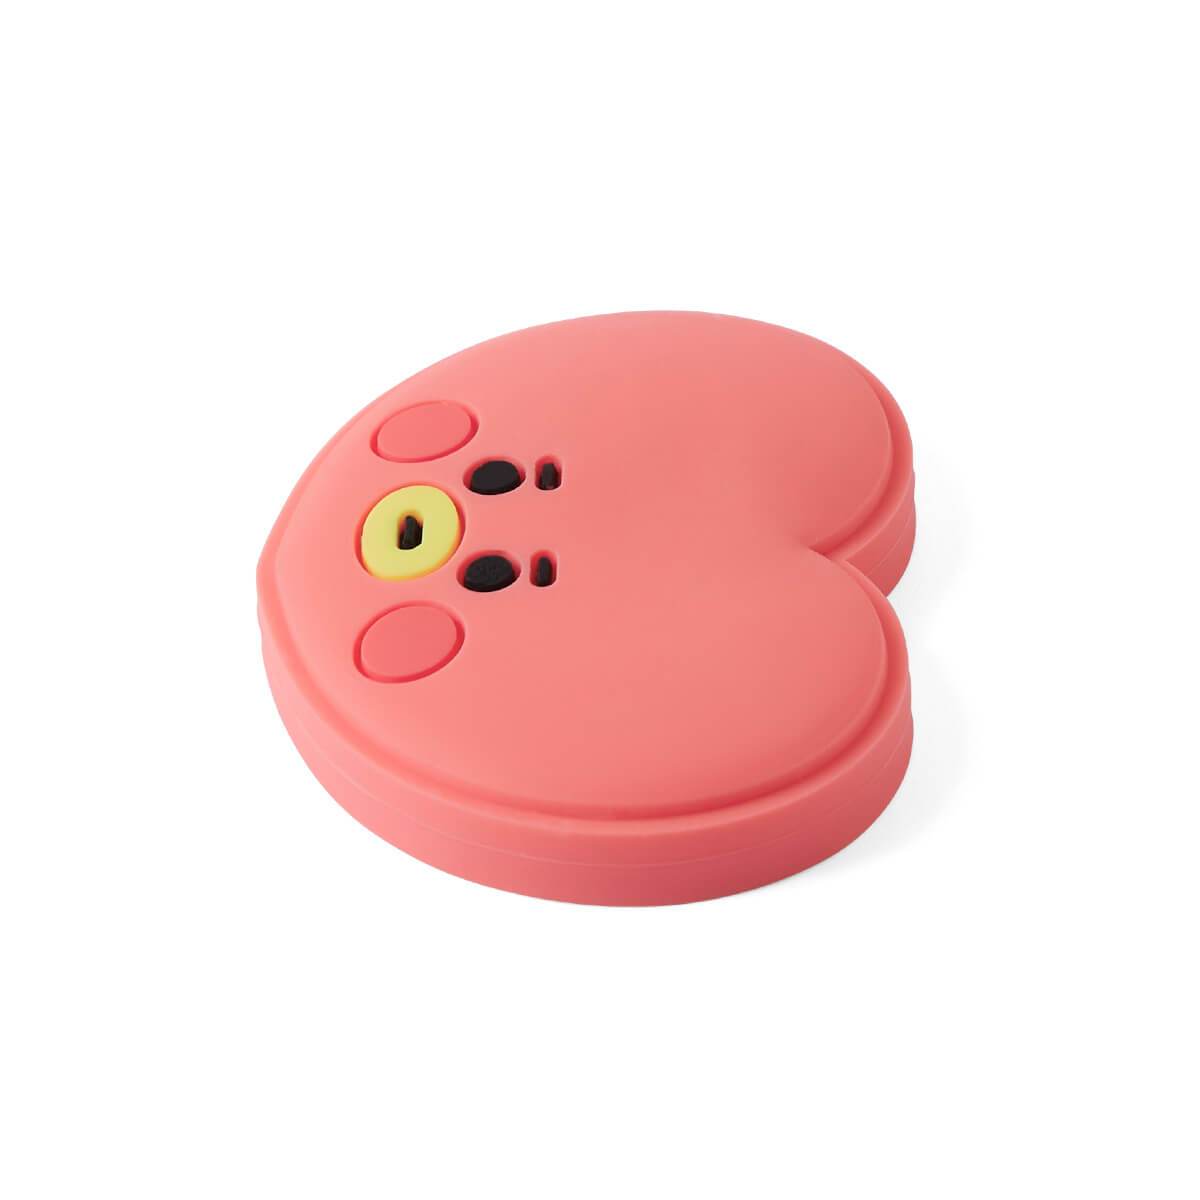 BT21 TATA Baby Silicone Magnet